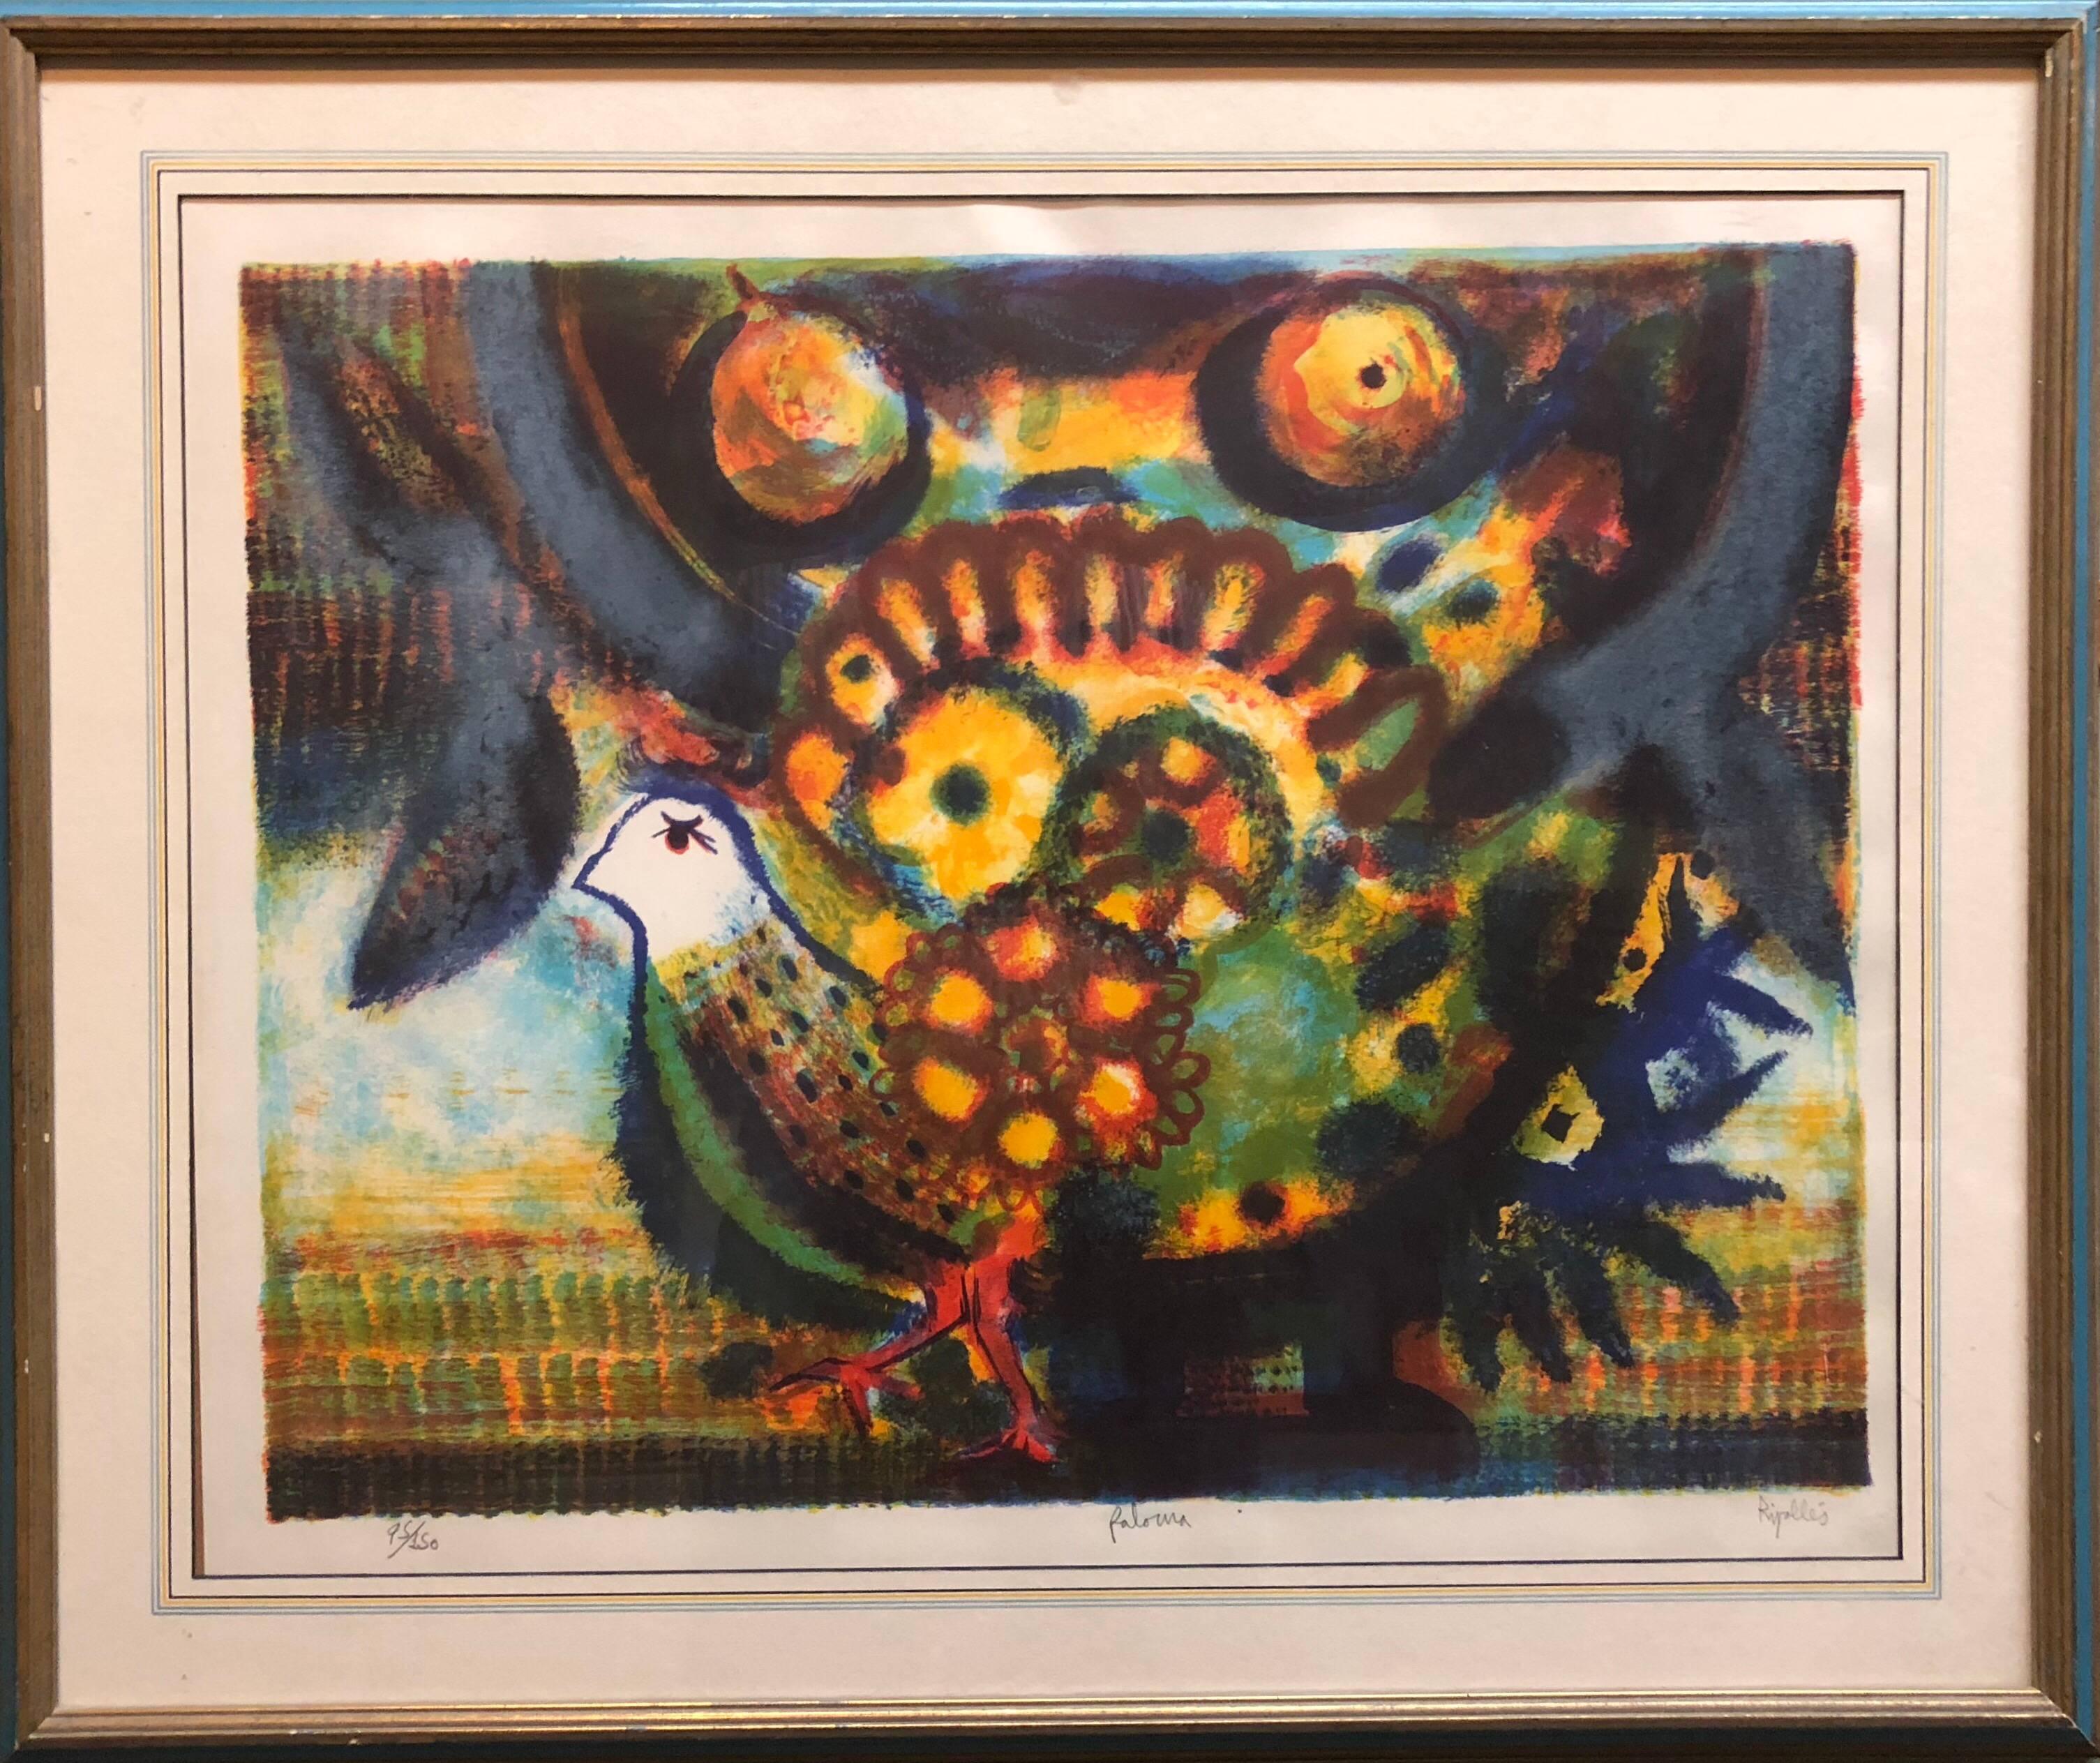 Spanish Modernist 'Paloma' Colorful Lithograph of a Bird - Print by Juan Garcia Ripolles